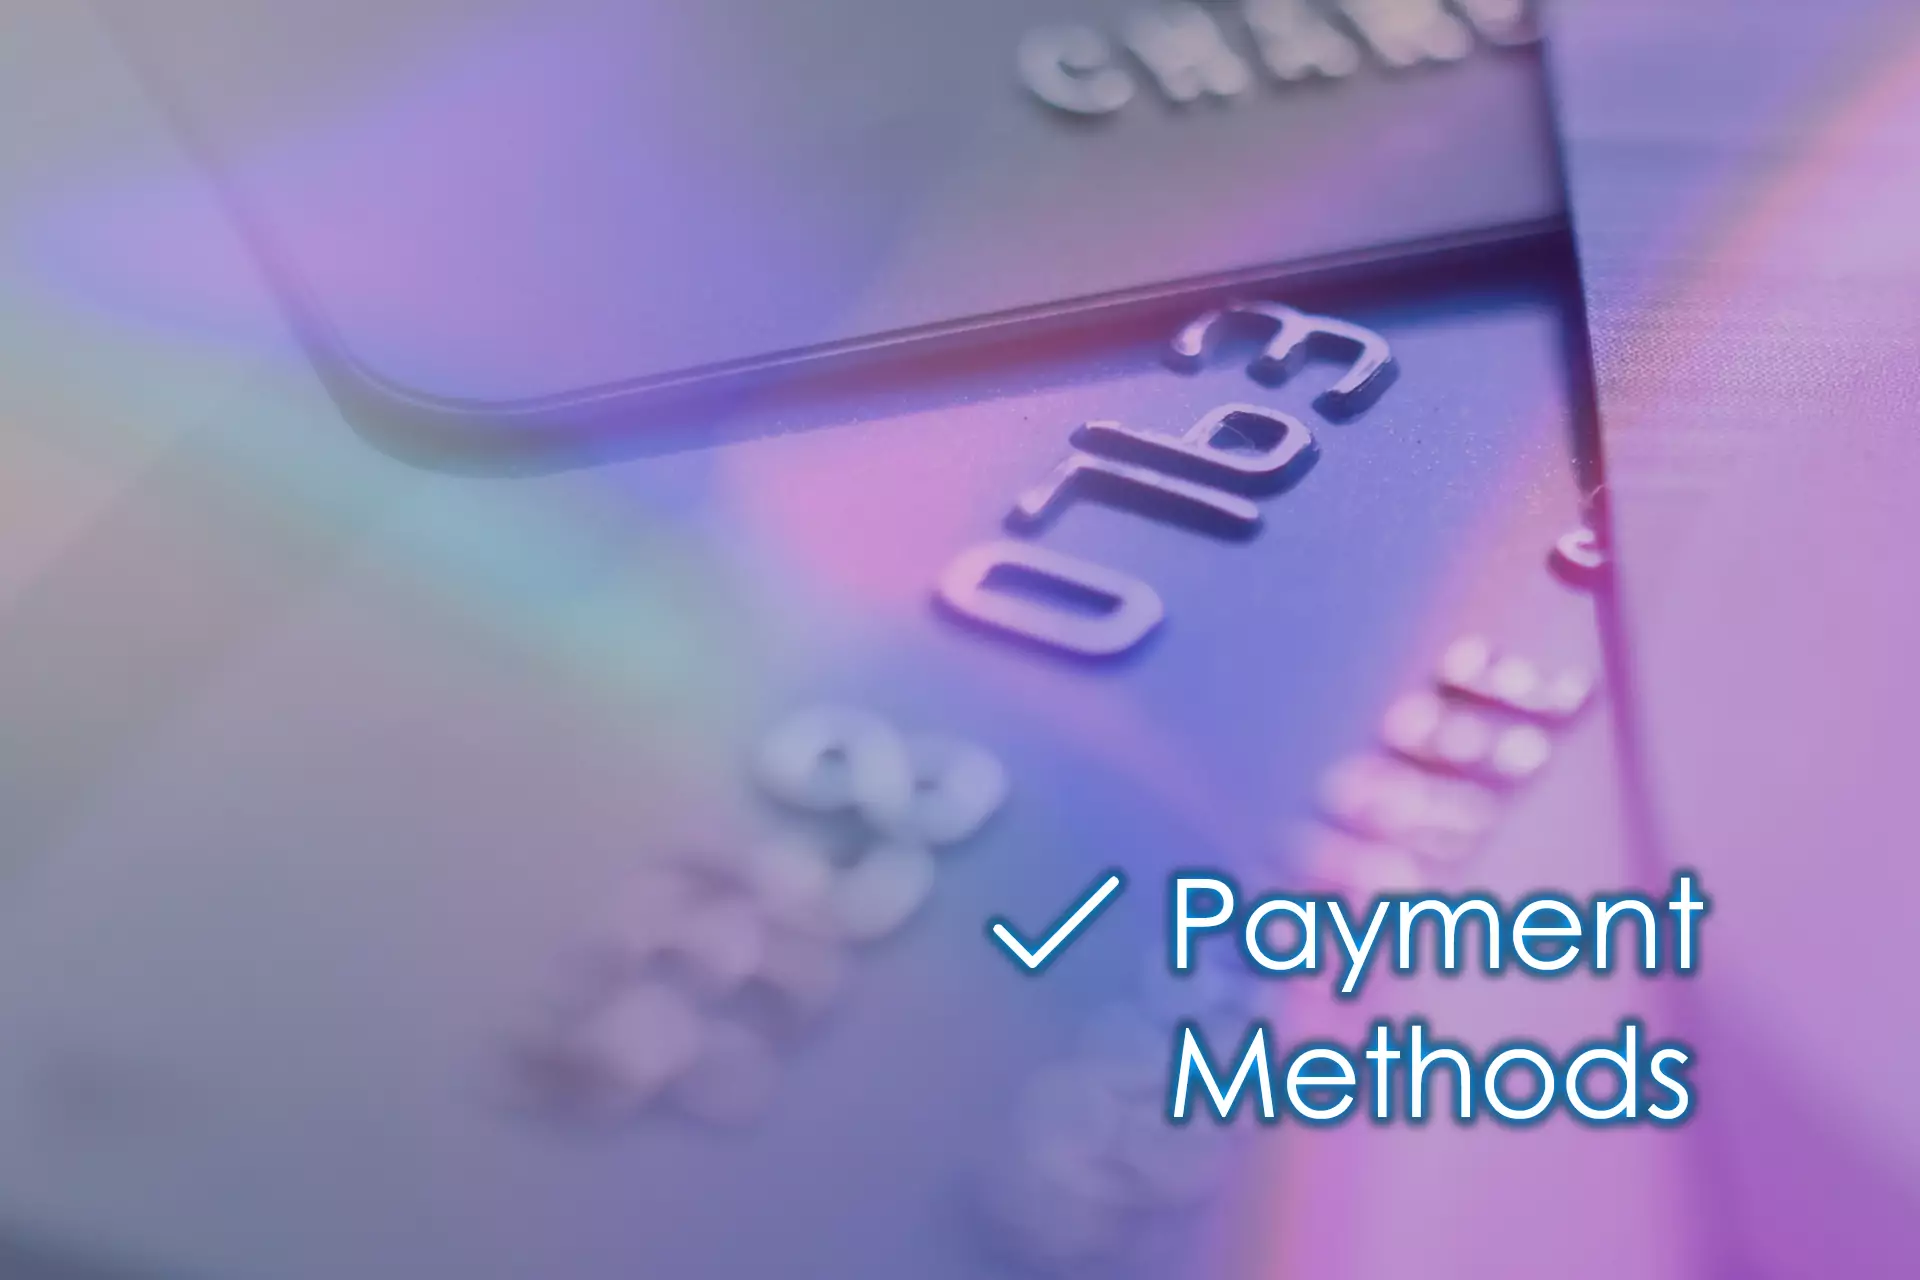 In our rate, we include the sites that can be topped up using Indian payment systems.